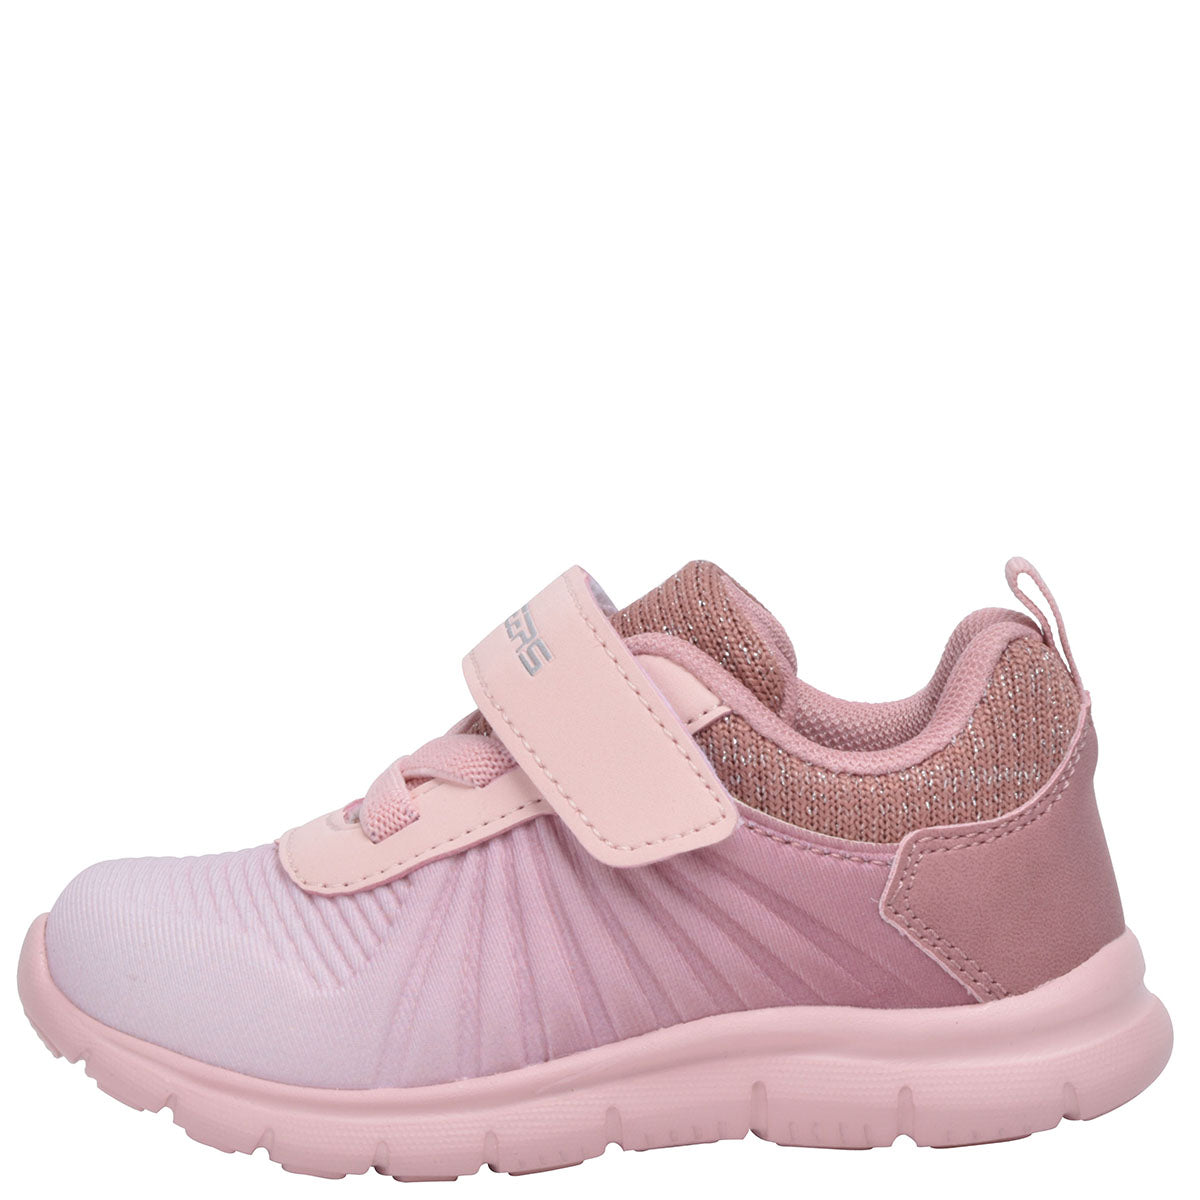 light and comfortable girls gym shoes